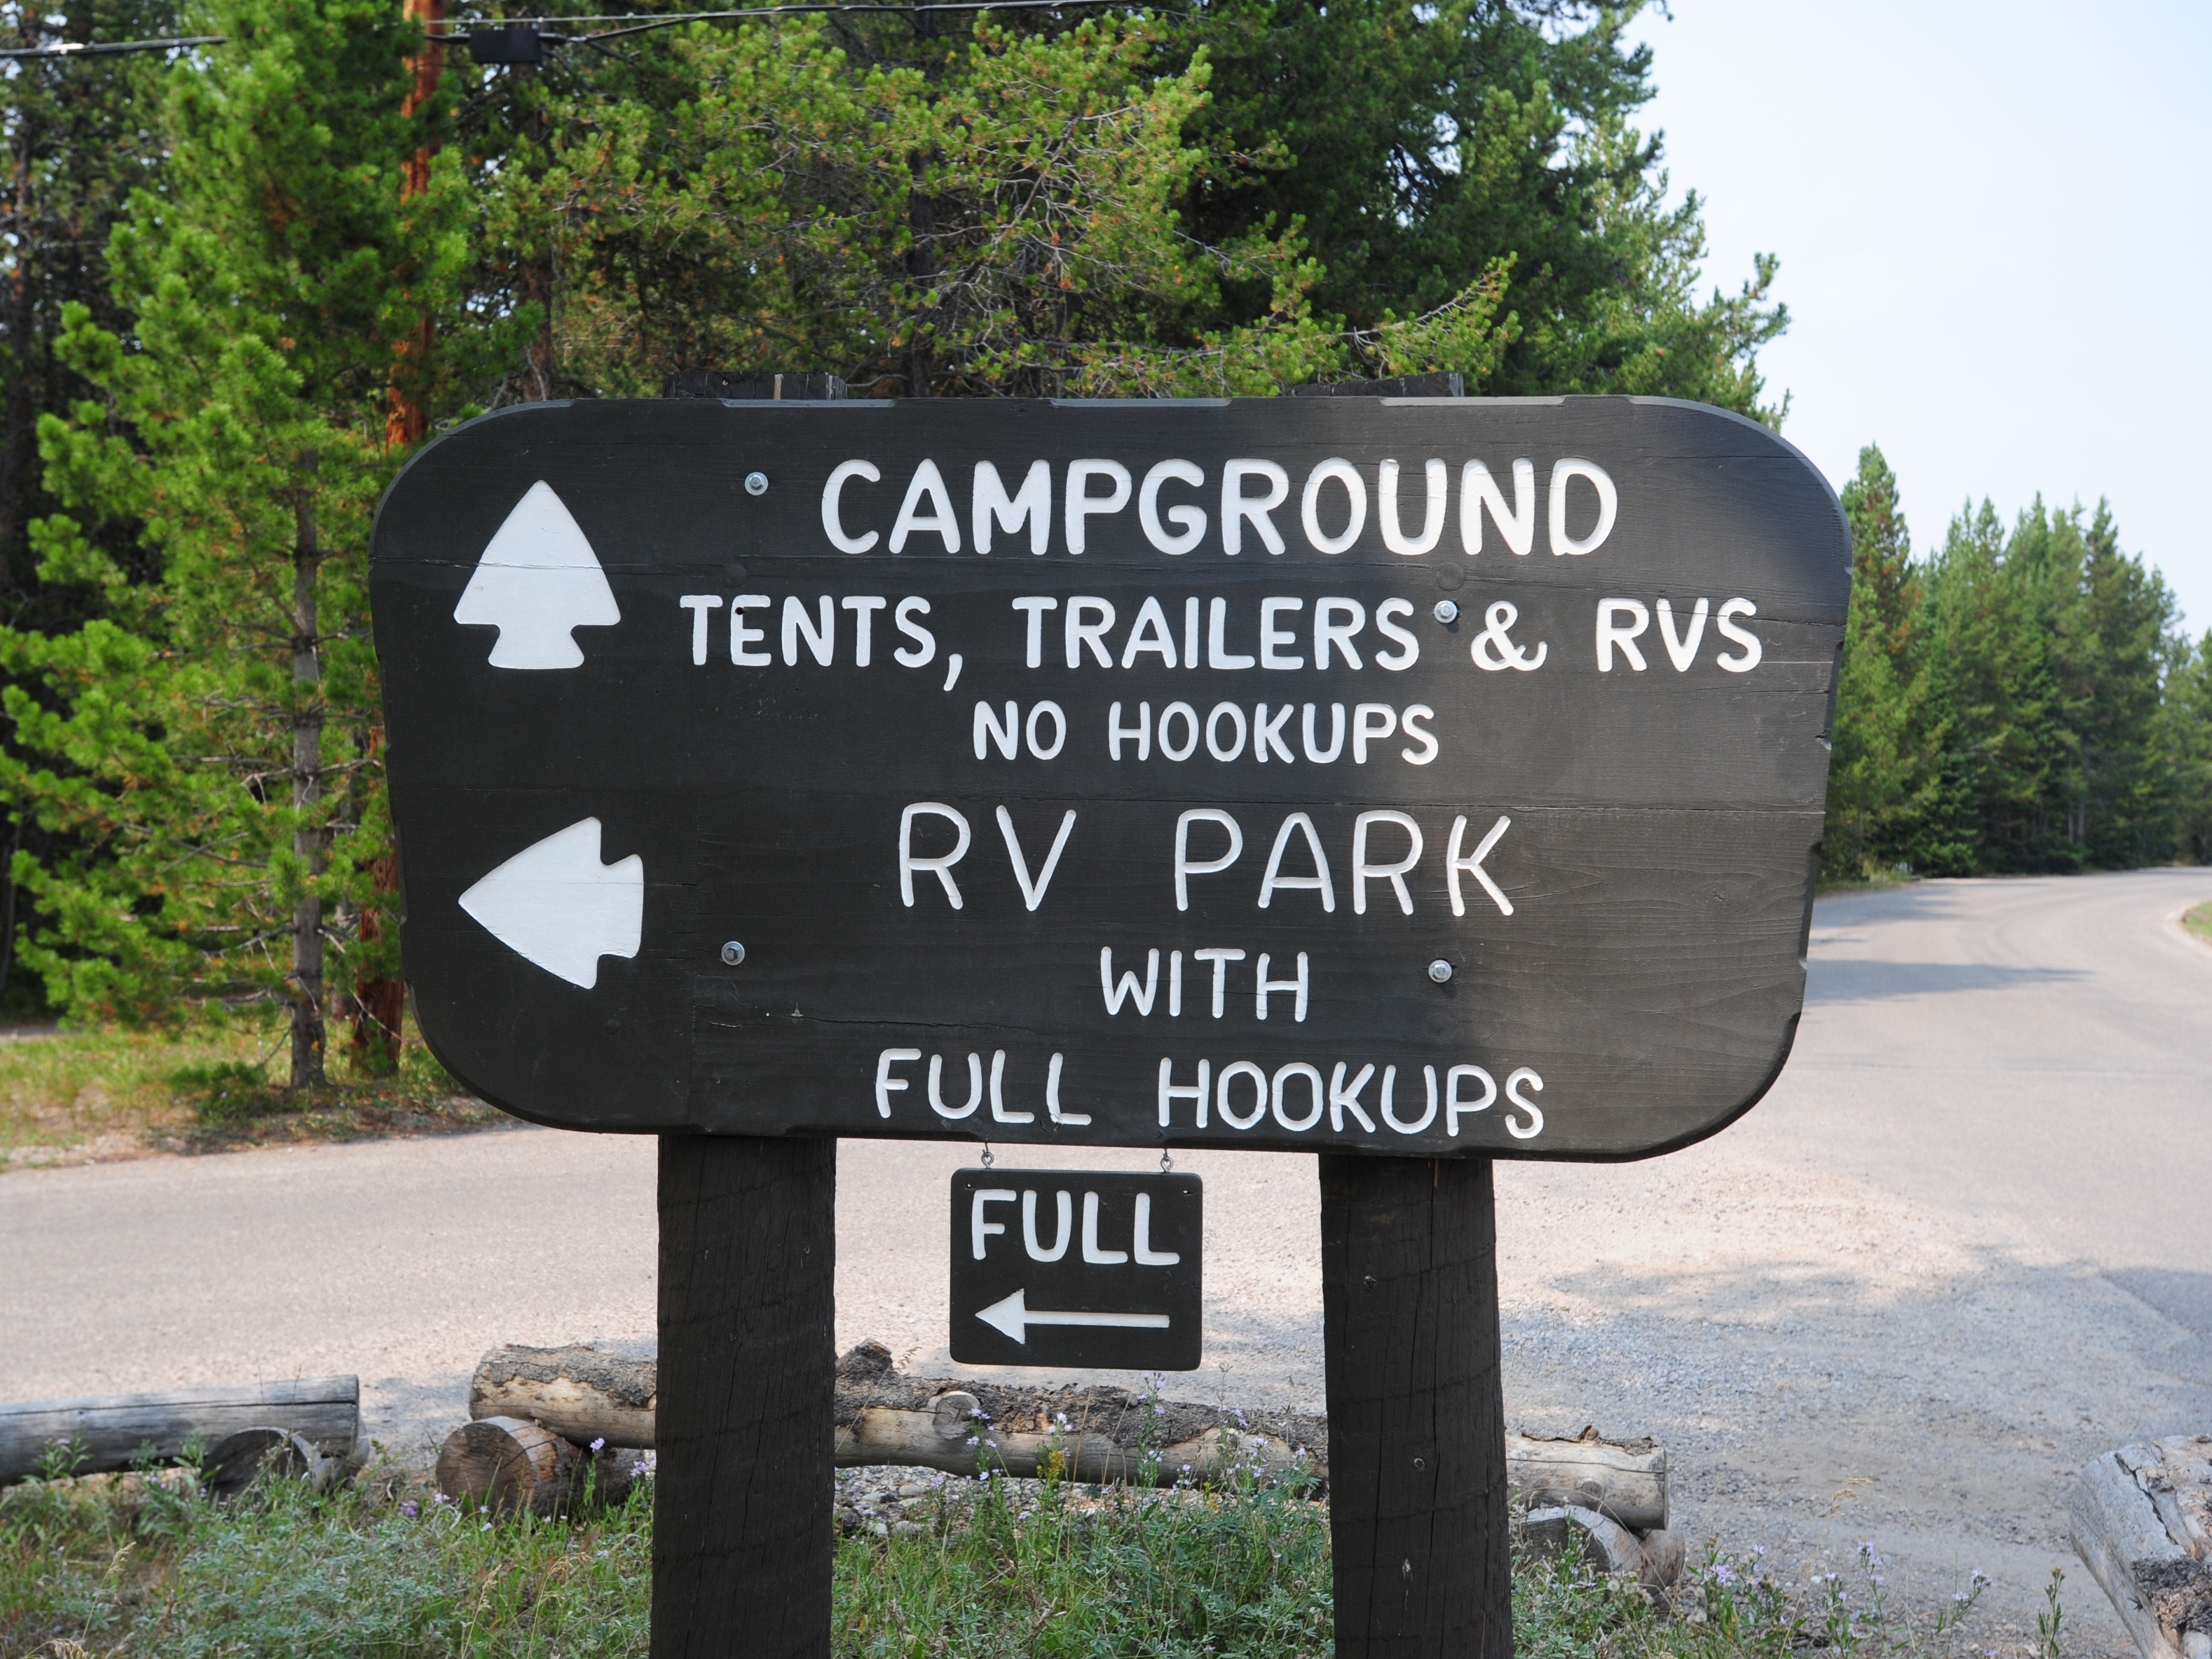 Brown wooden park service sign with campground information and RV park information